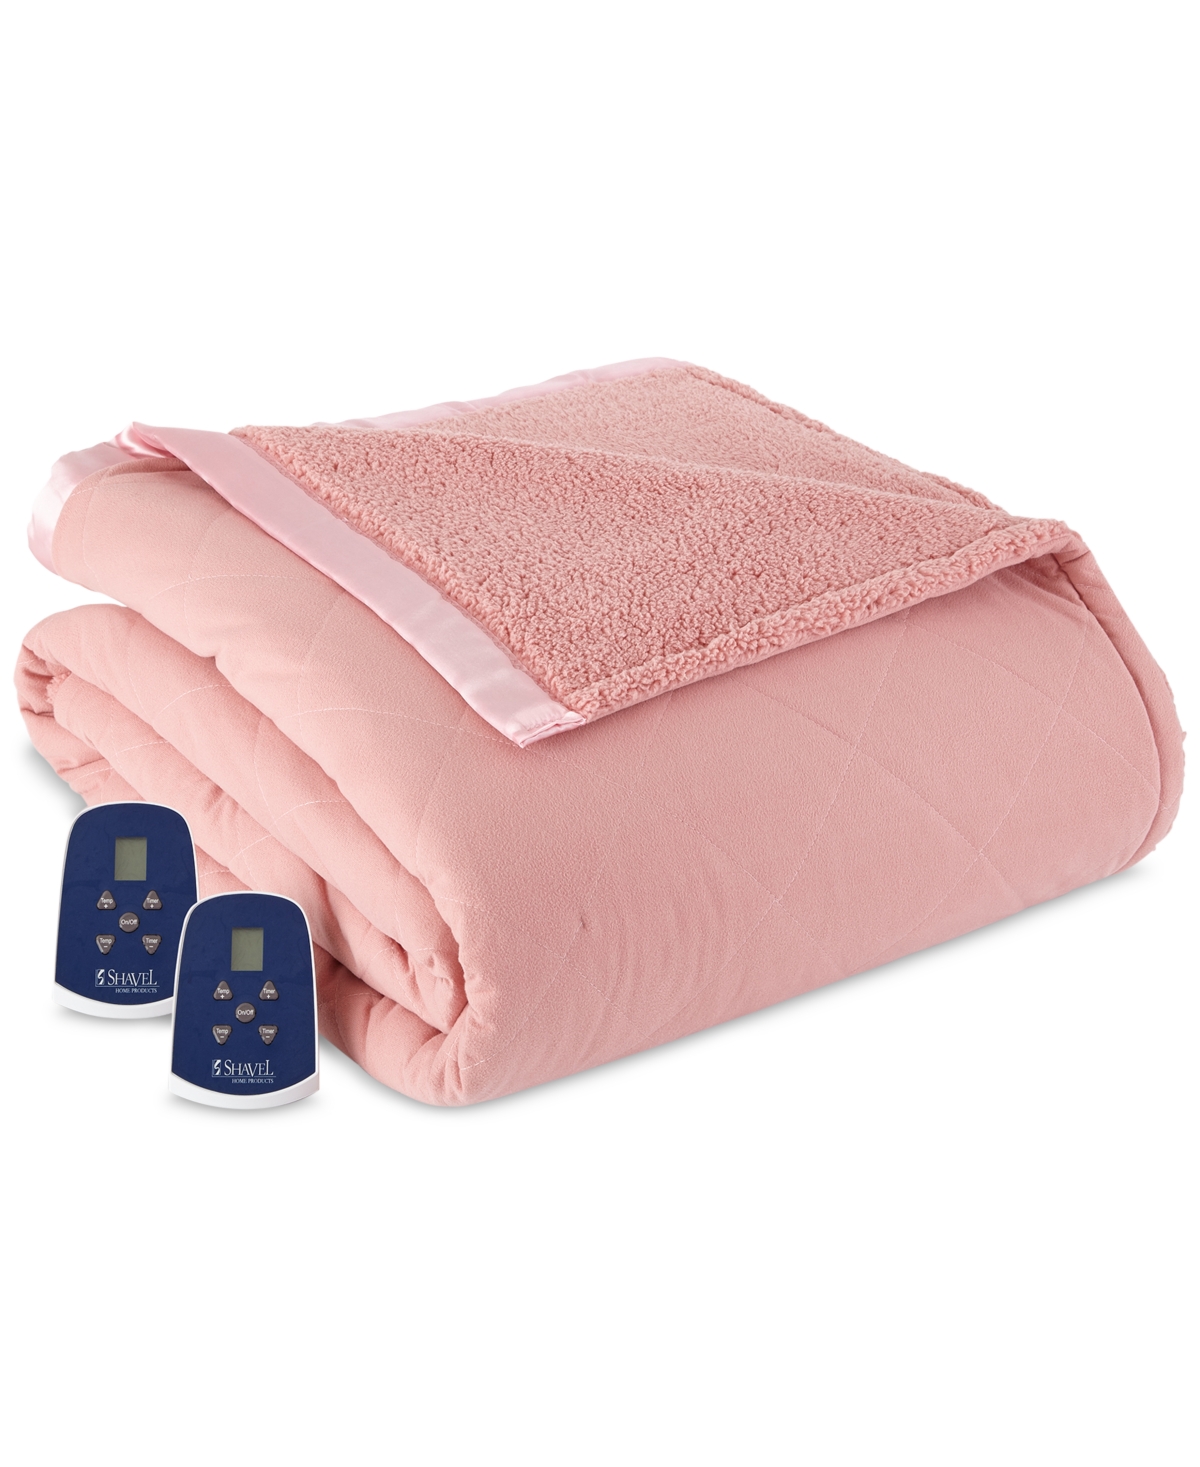 Shavel Reversible Micro Flannel To Sherpa Full Electric Blanket Bedding In Frosted Rose